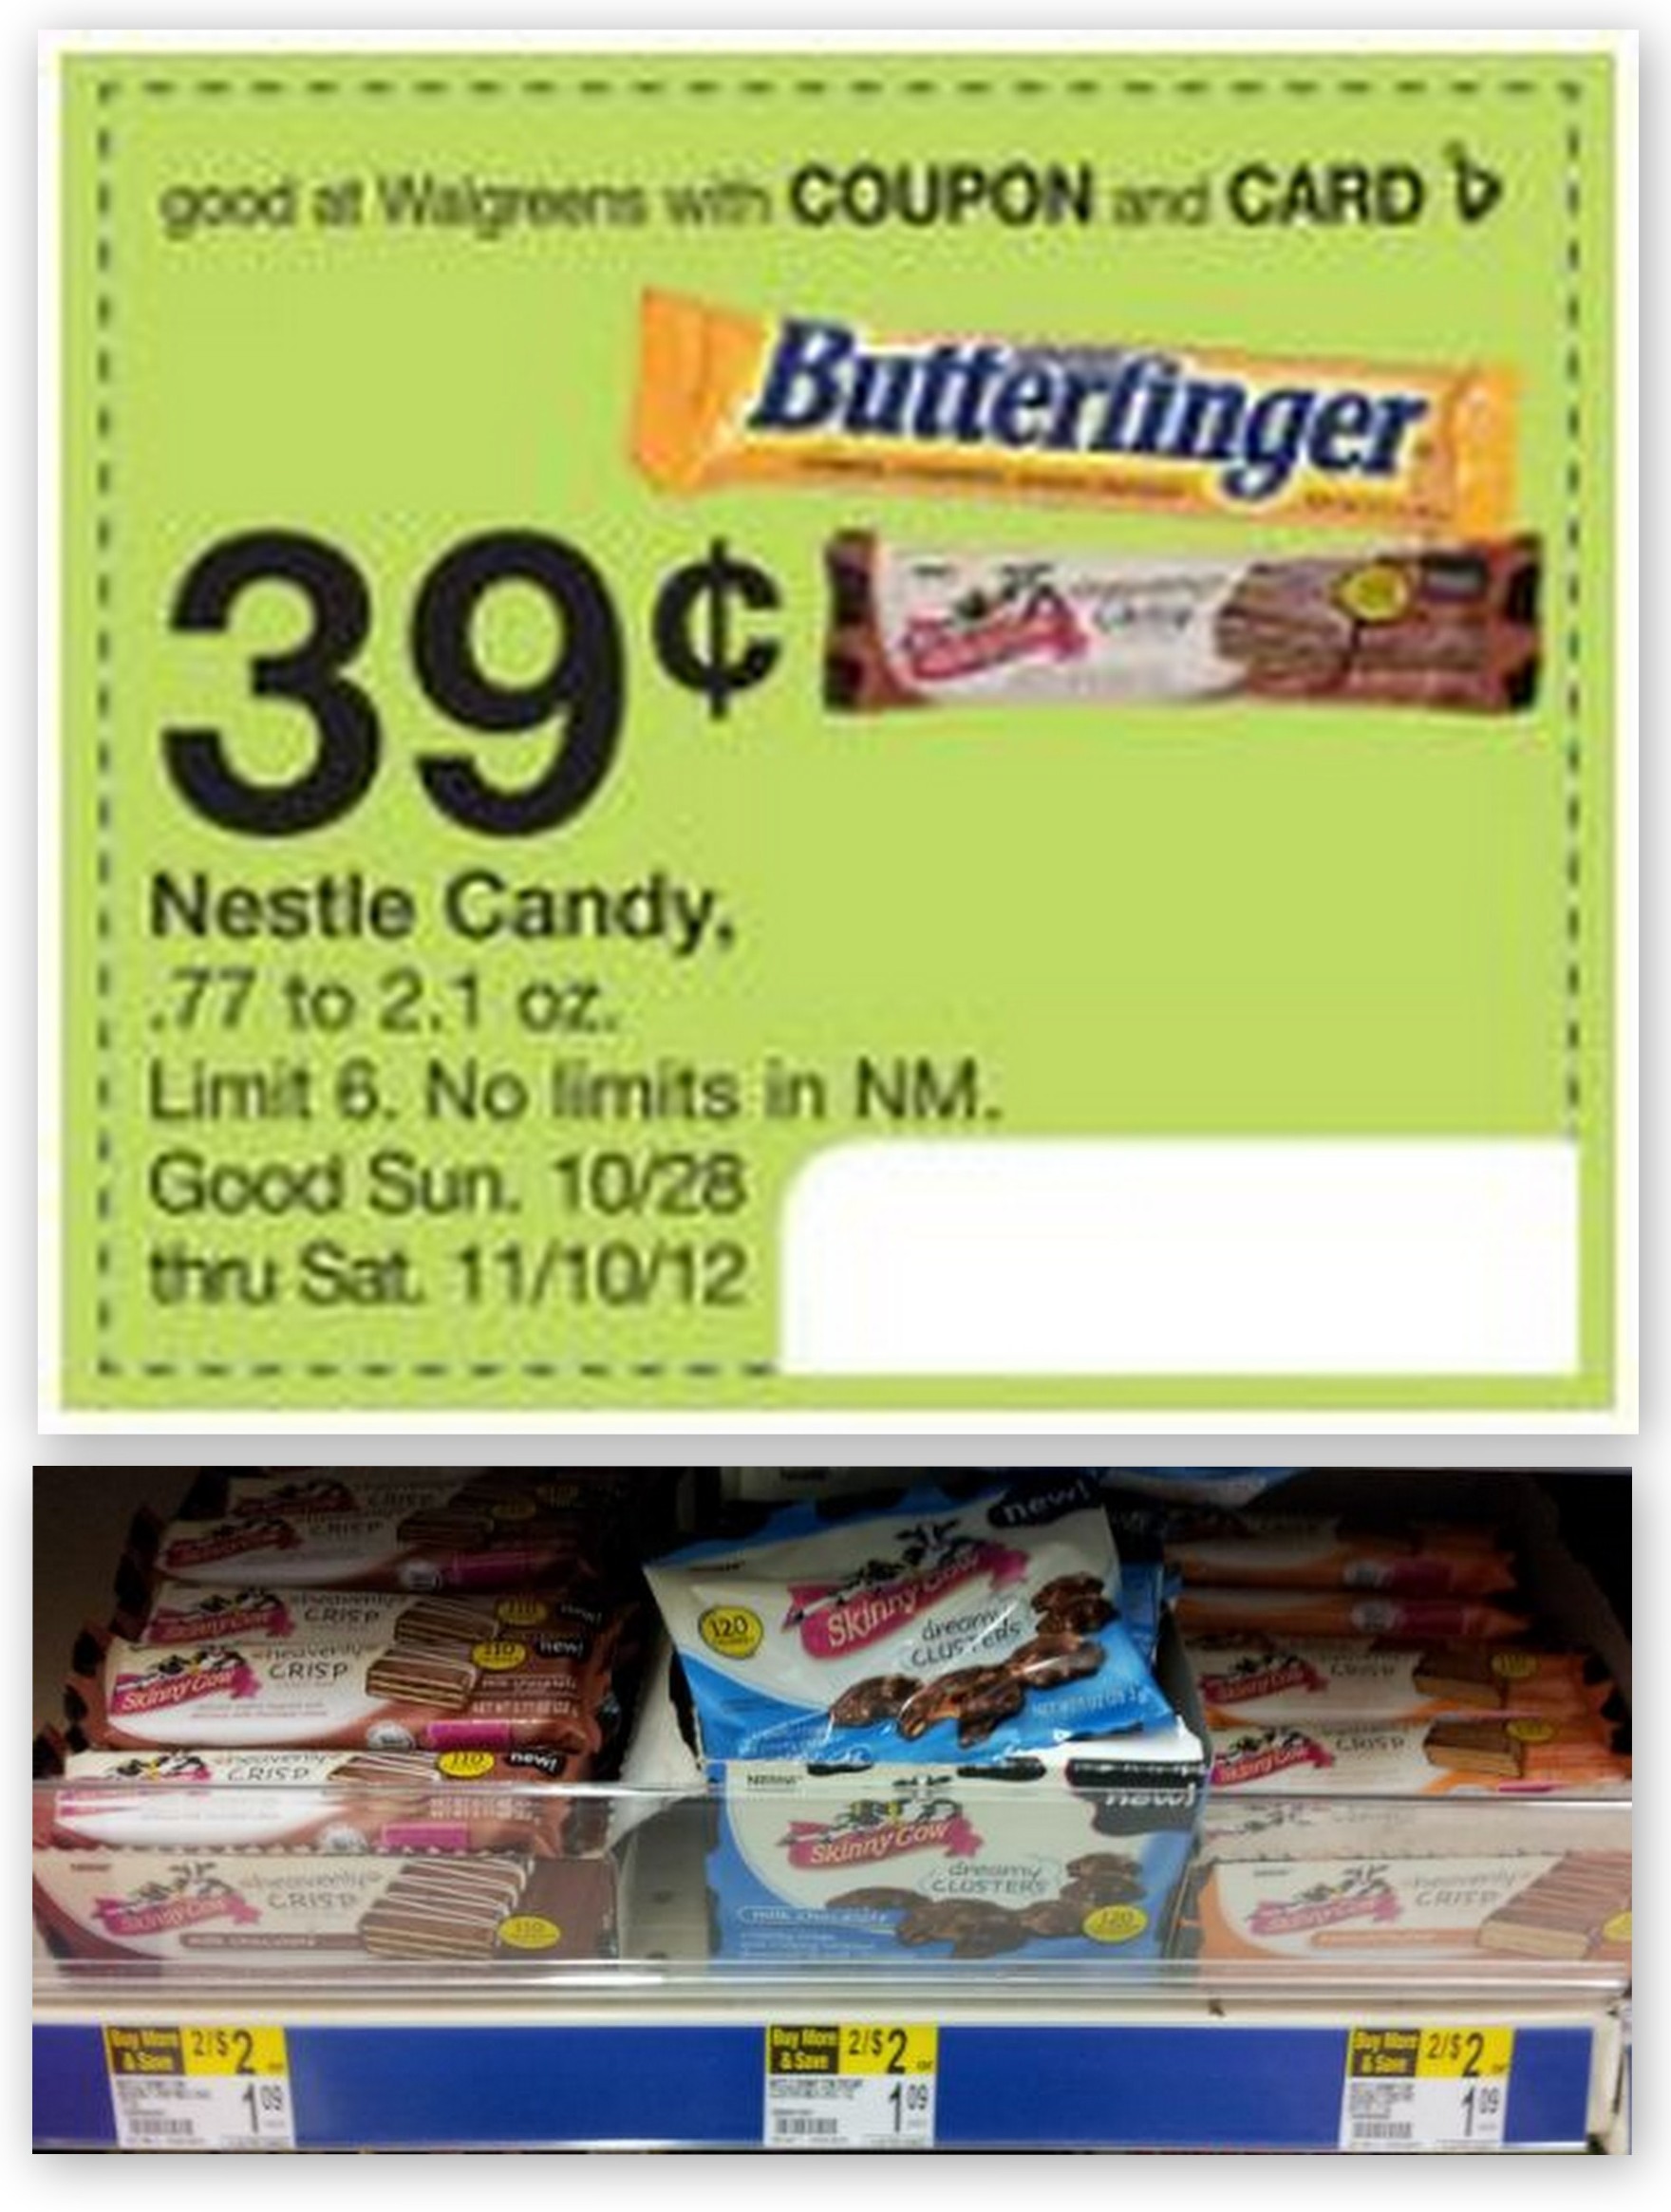 Skinny Cow Singles Candy Just 19¢ at Walgreens